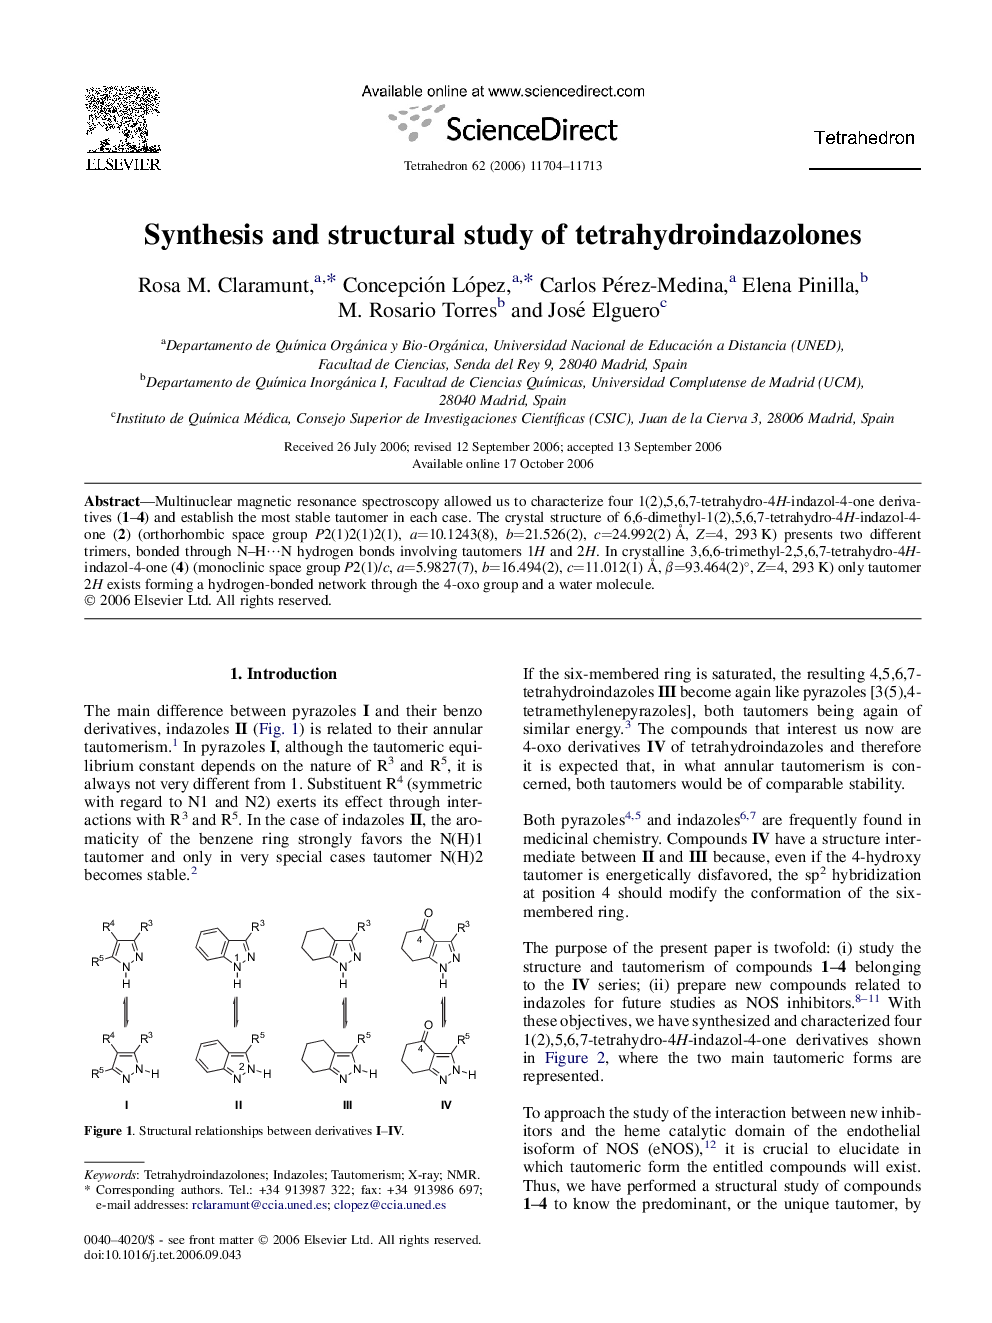 Synthesis and structural study of tetrahydroindazolones